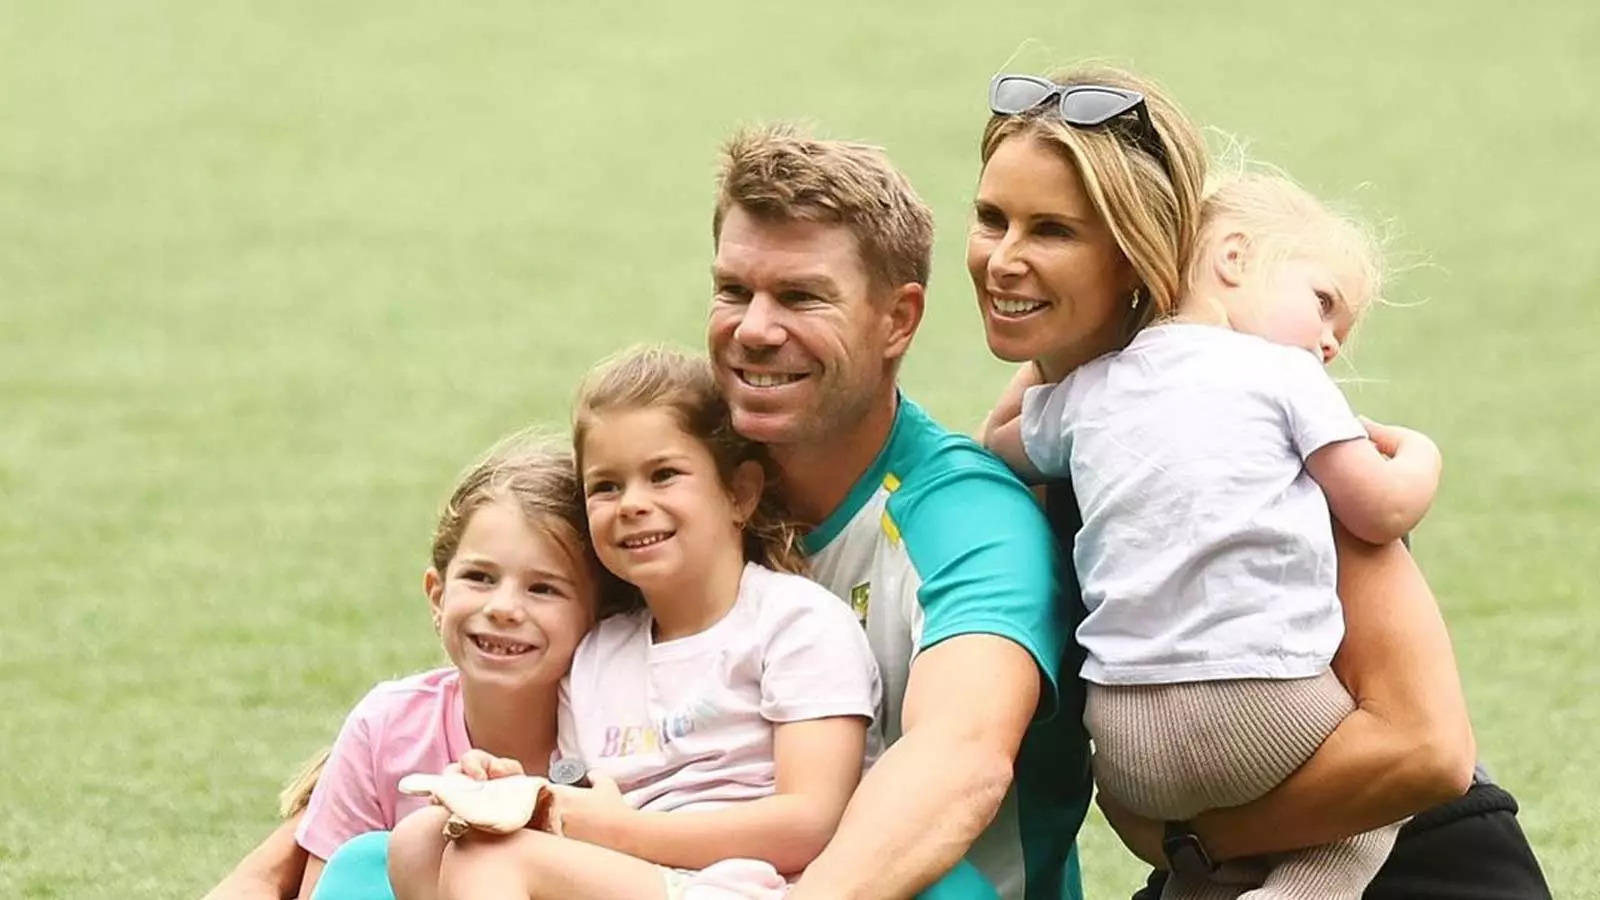 Candice Warner hit out at CA over its treatment of David Warner